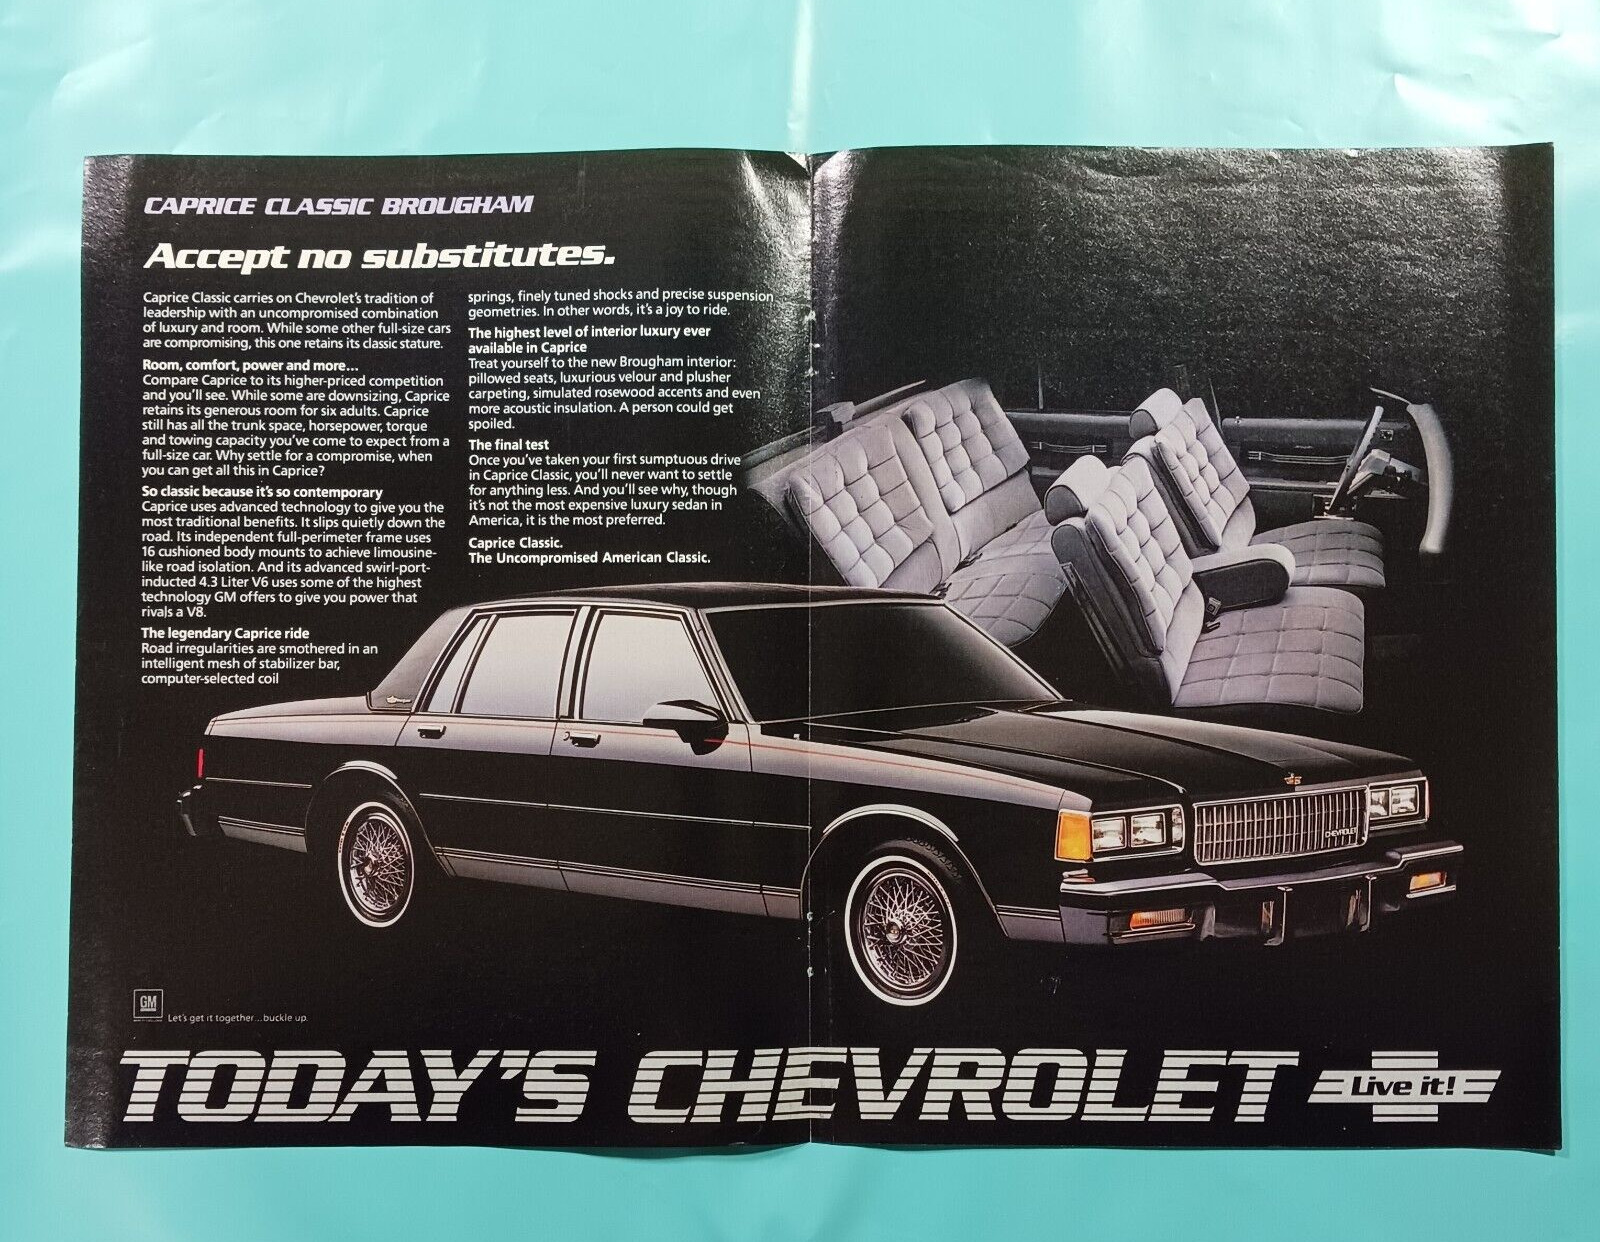 1985 VINTAGE CHEVROLET CAPRICE CLASSIC BROUGHAM 2-PAGE PRINT AD